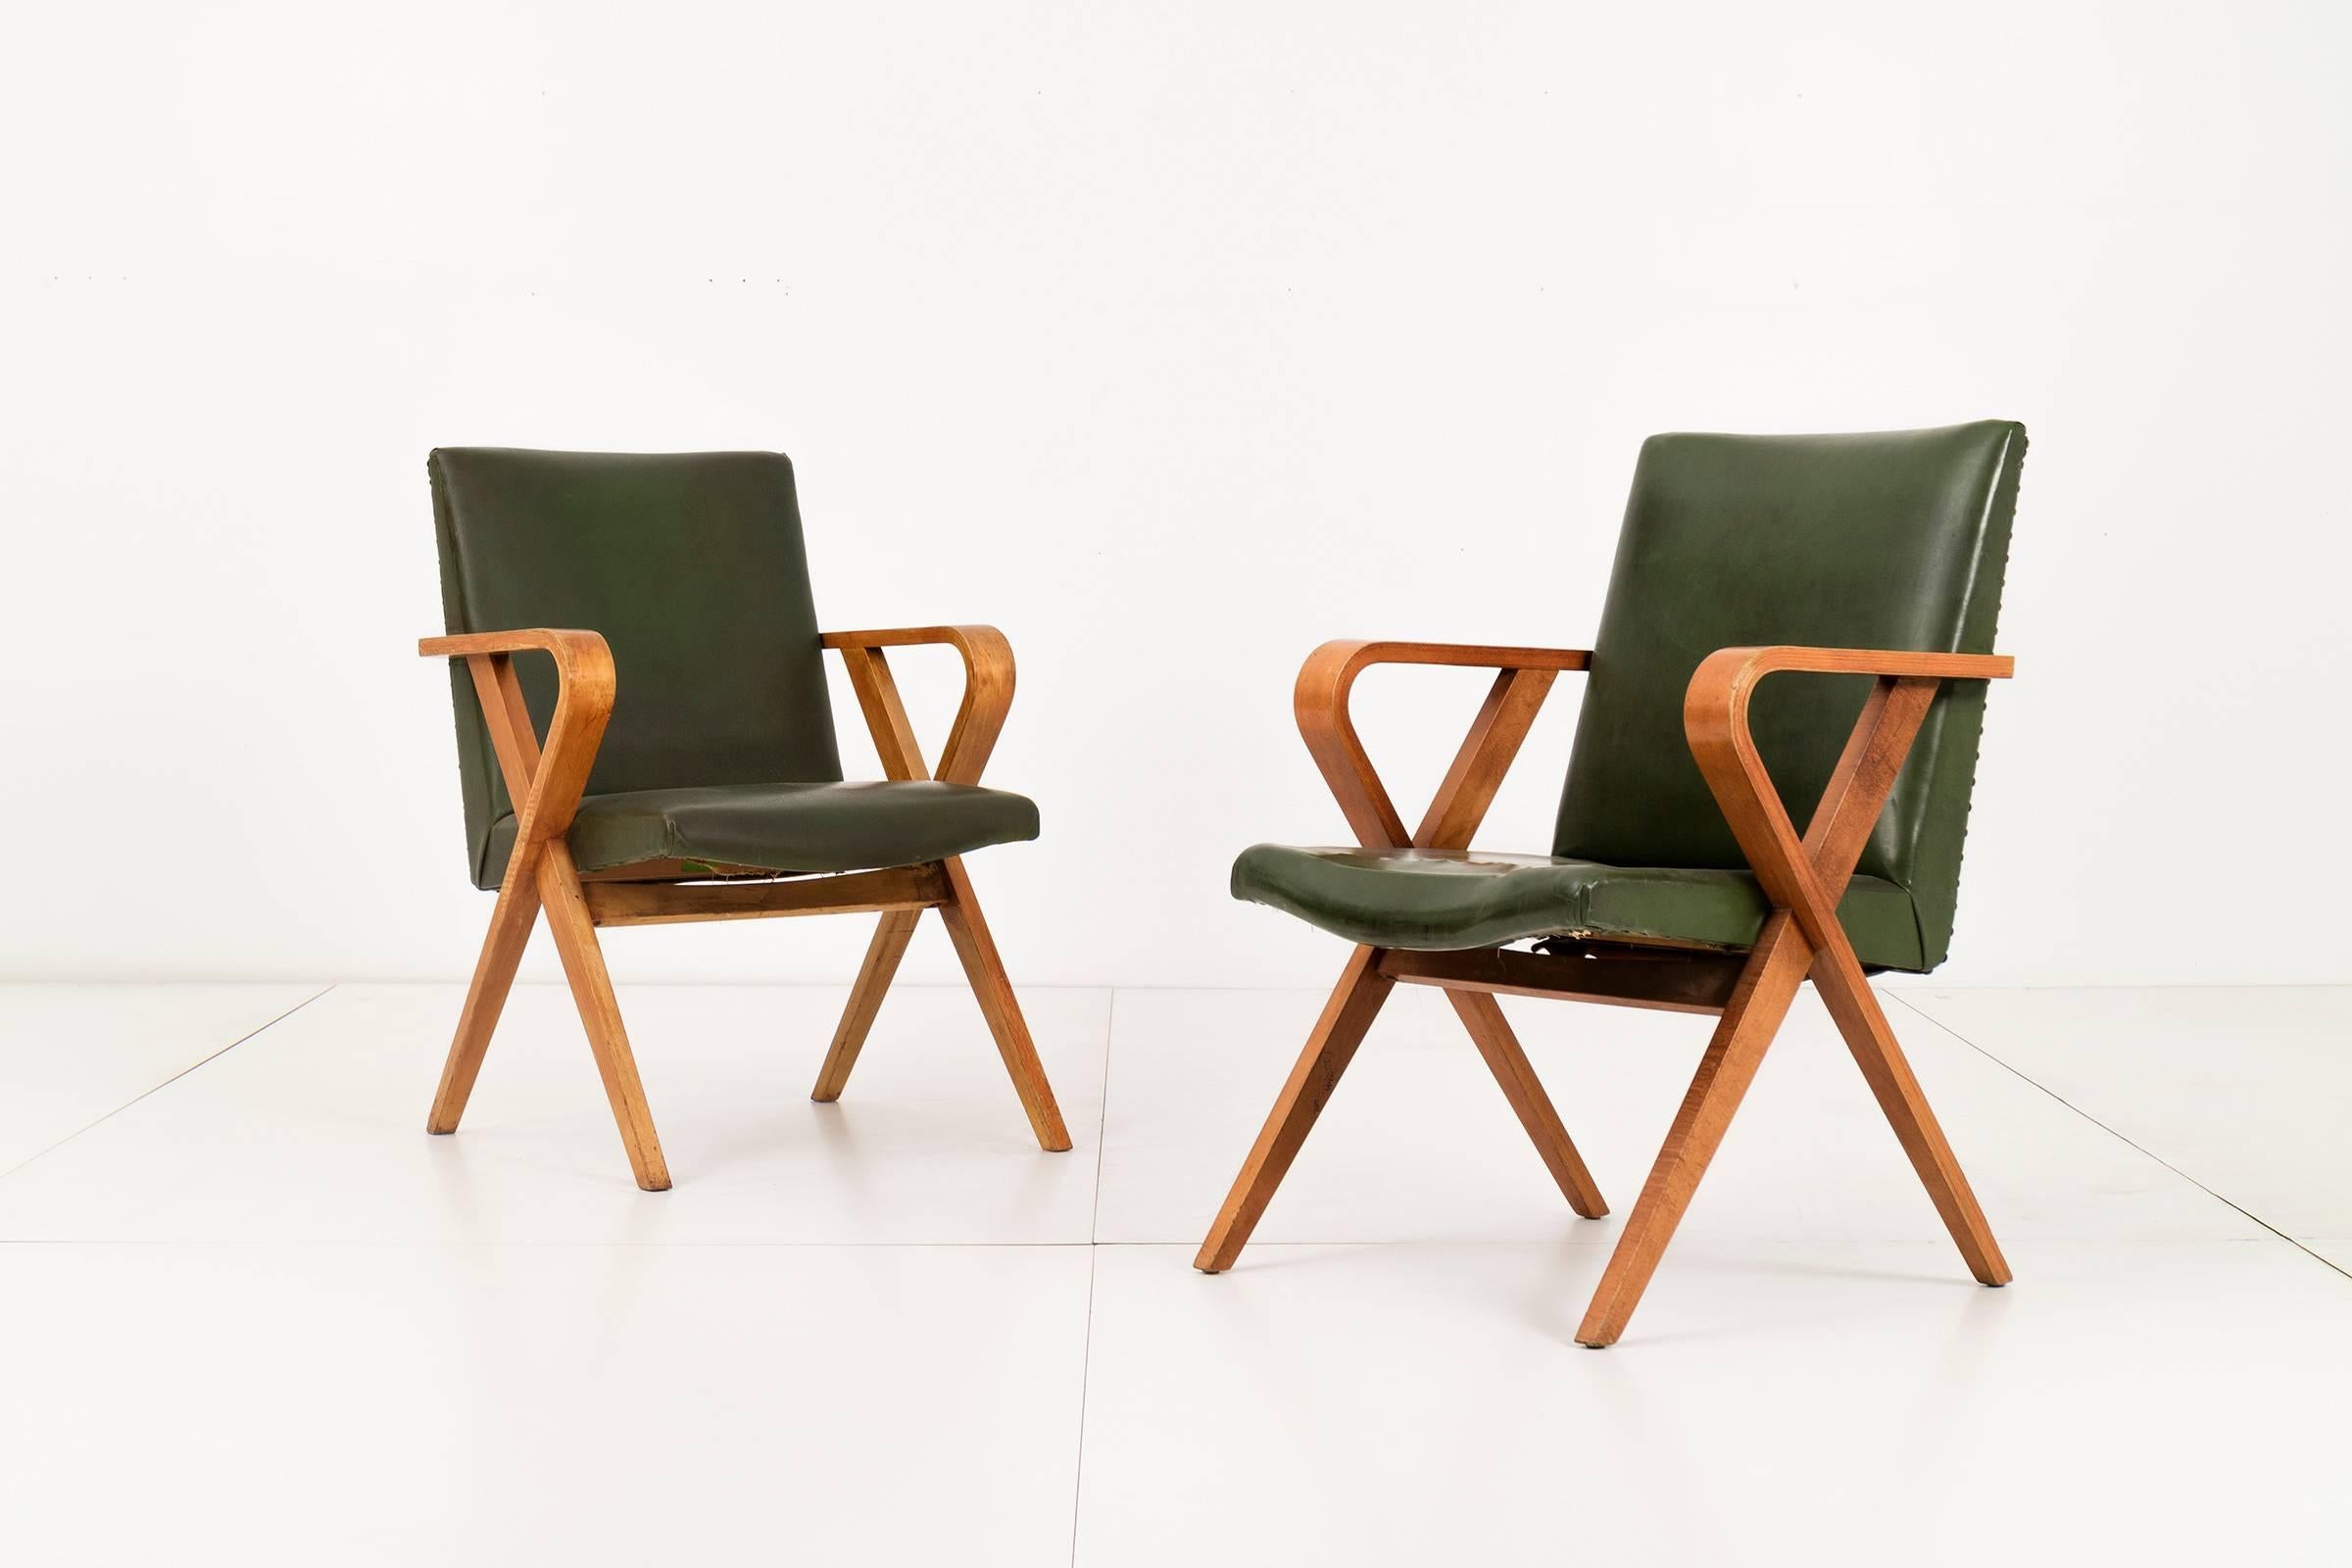 Pair of Henry glass armchairs. Green leather seat with metal rivets alining the back. Angular bentwood frame with curved armrest.